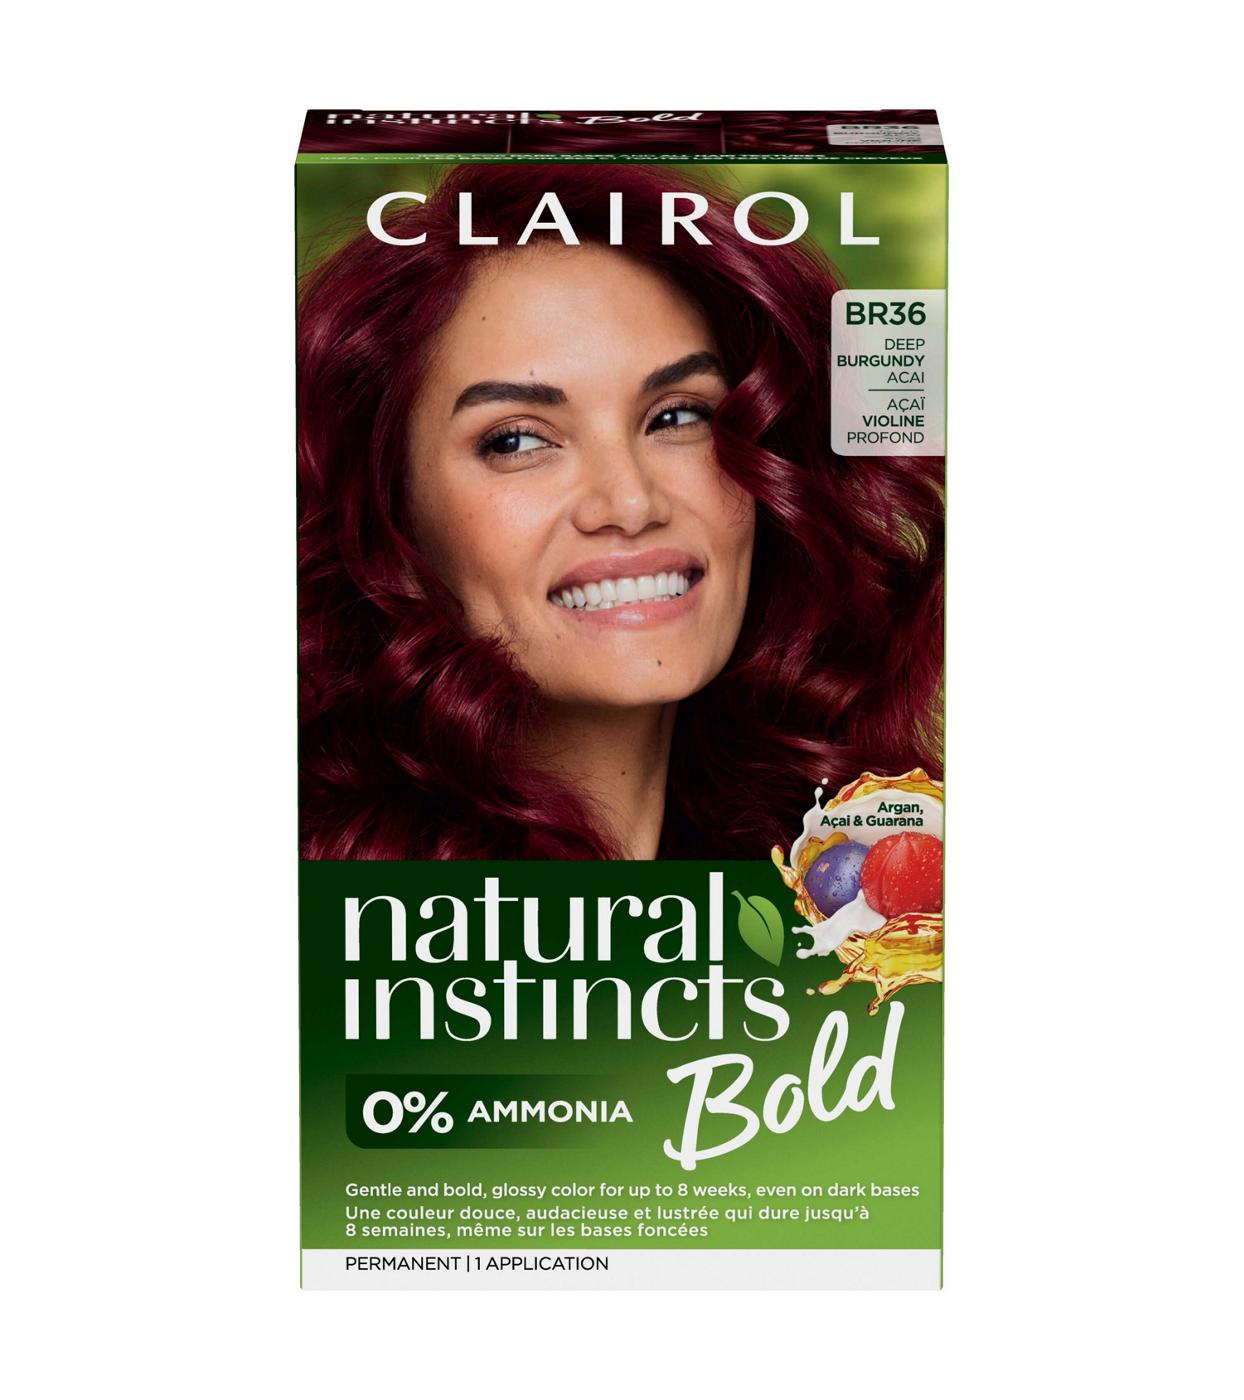 Clairol Natural Instincts Bold Permanent Hair Color - BR36 Deep Burgundy Acai ; image 1 of 6